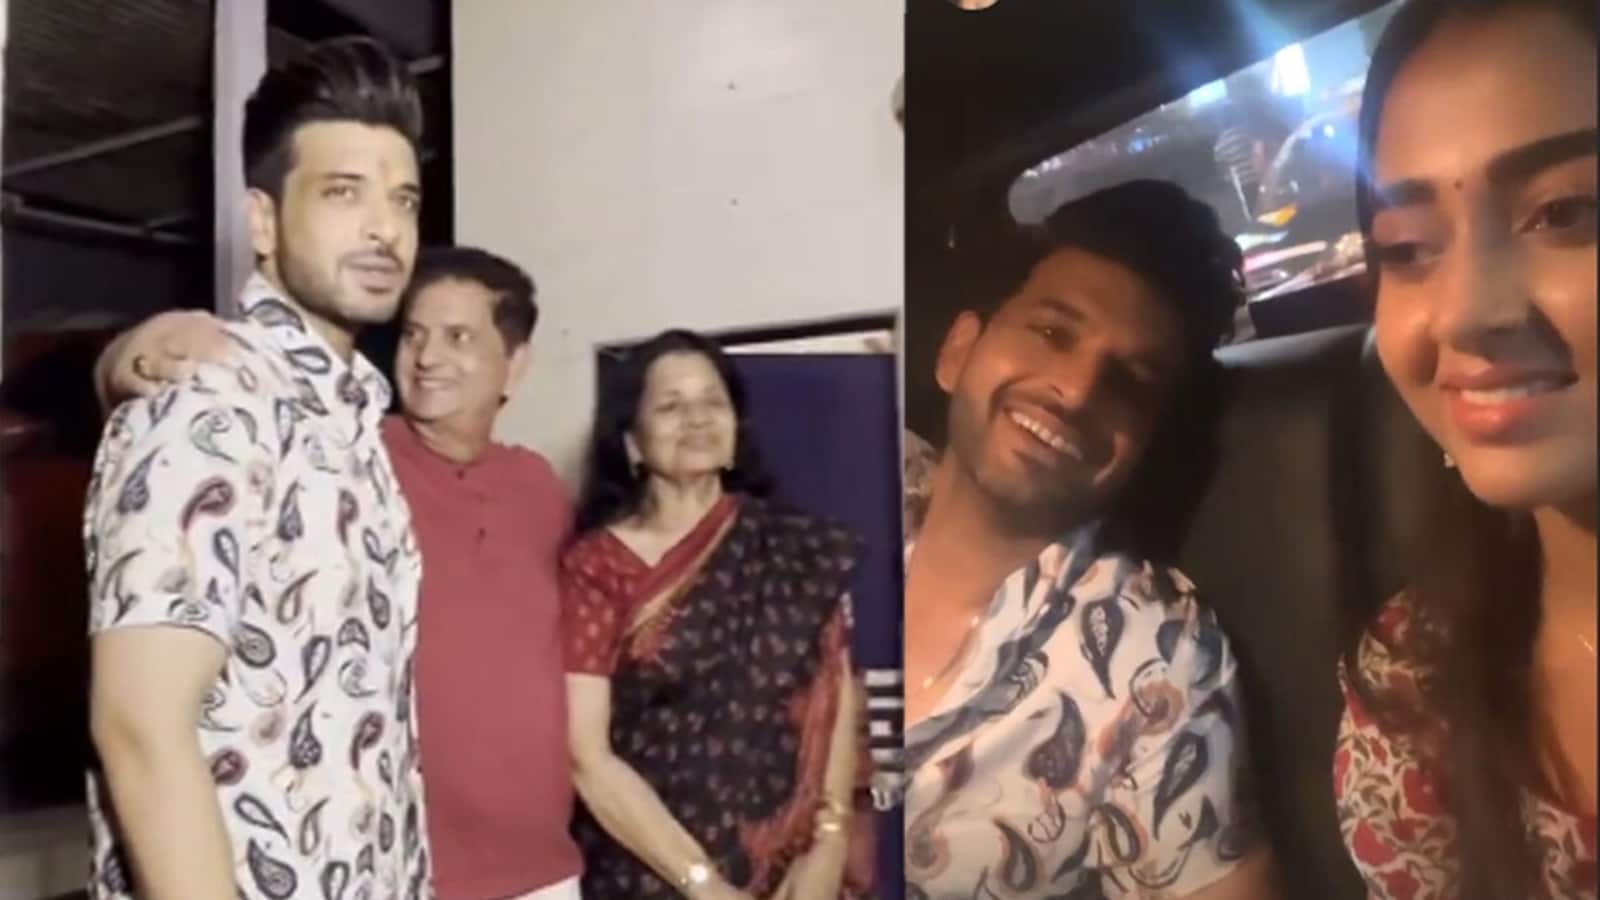 Karan Kundrra attends a function at Tejasswi Prakash’s residence with parents, poses with a tilak on his forehead. Watch